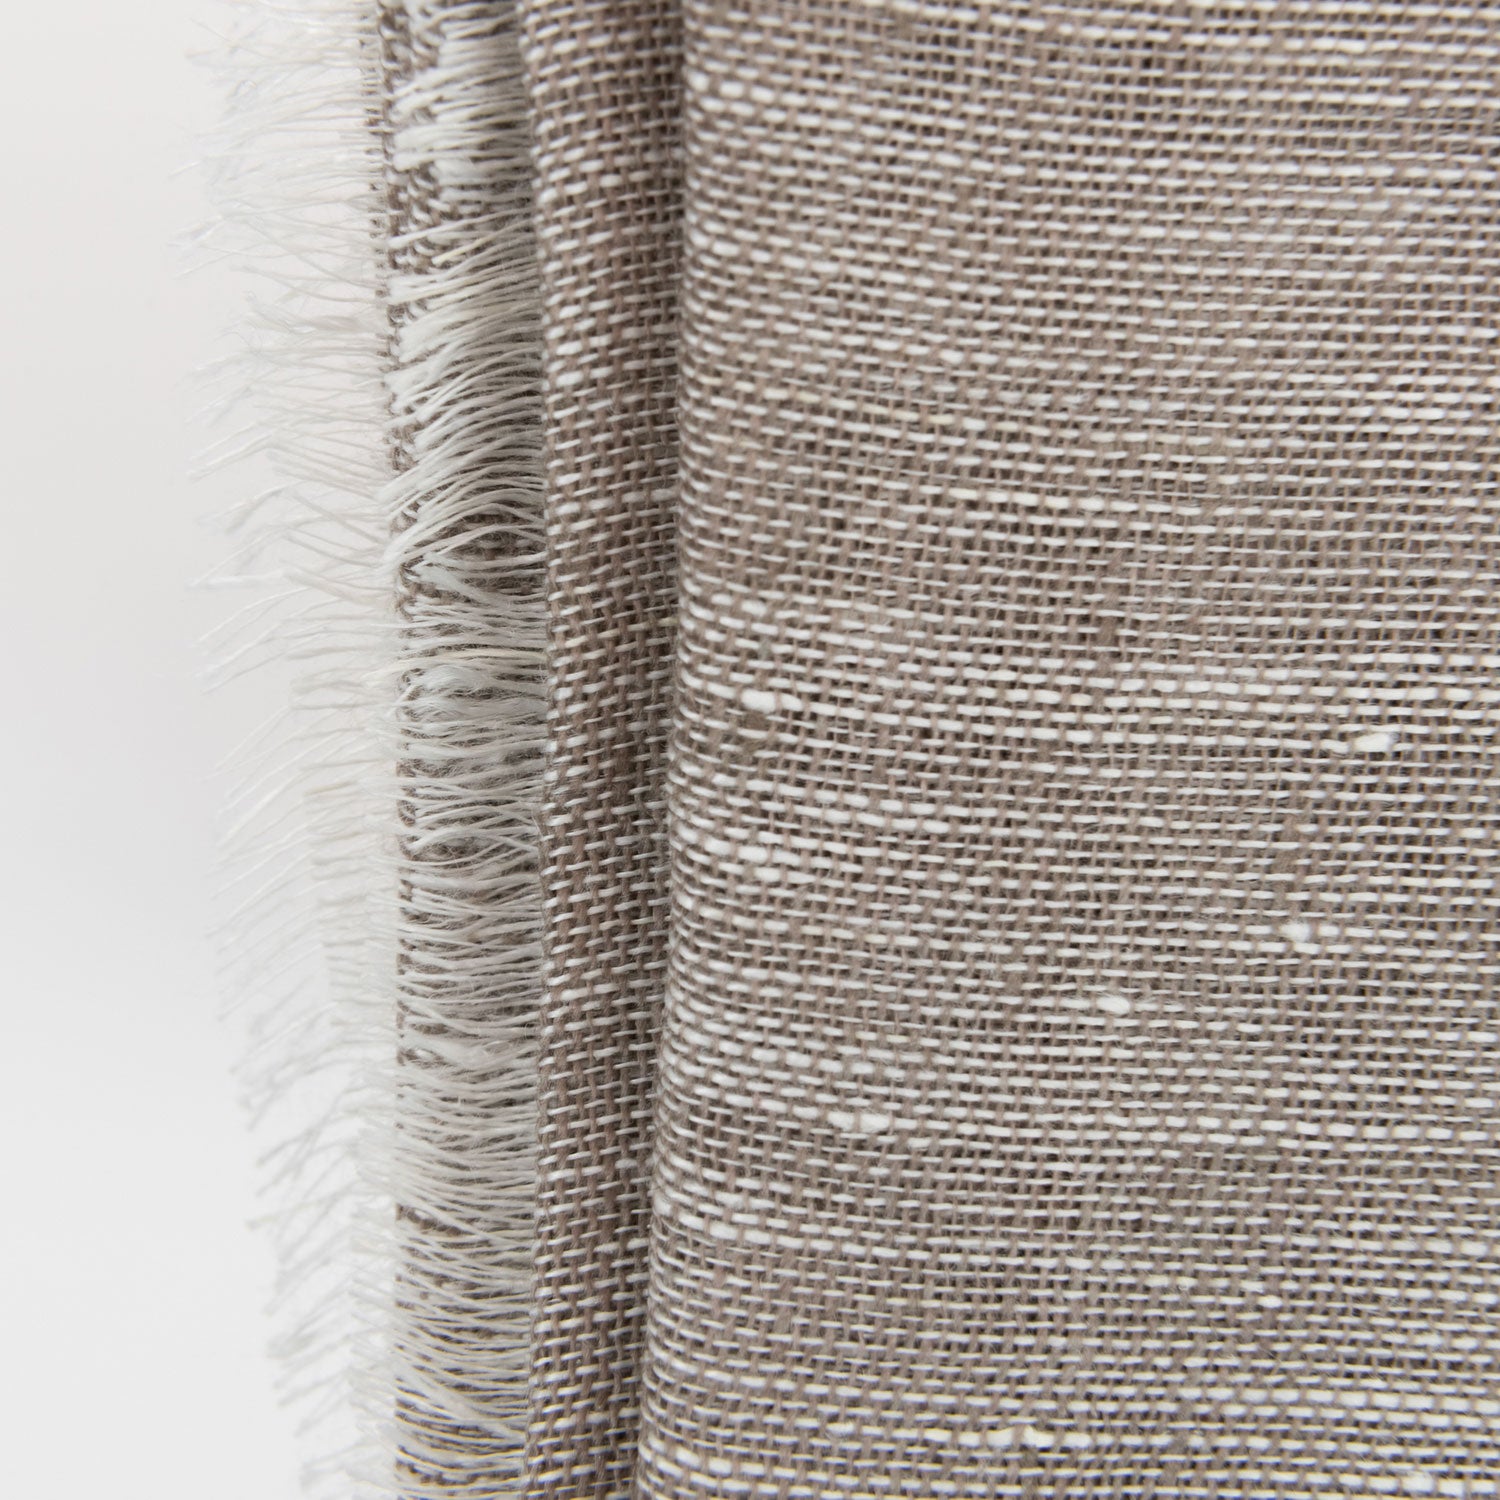 A close-up photo of the sand linen scarf on a white background.